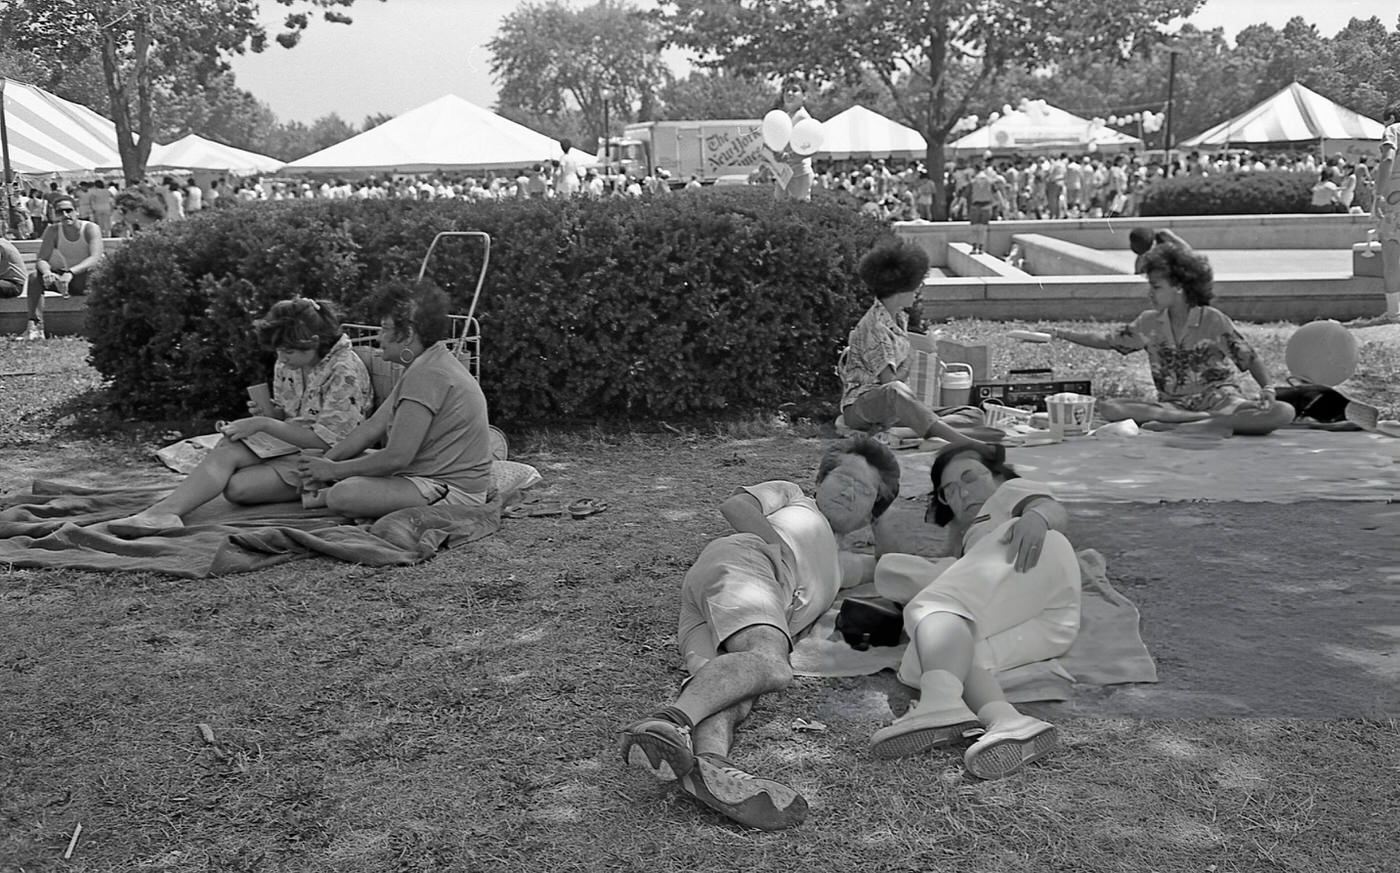 People Lie On The Grass In Flushing Meadows Park, Corona, Queens, 1986.